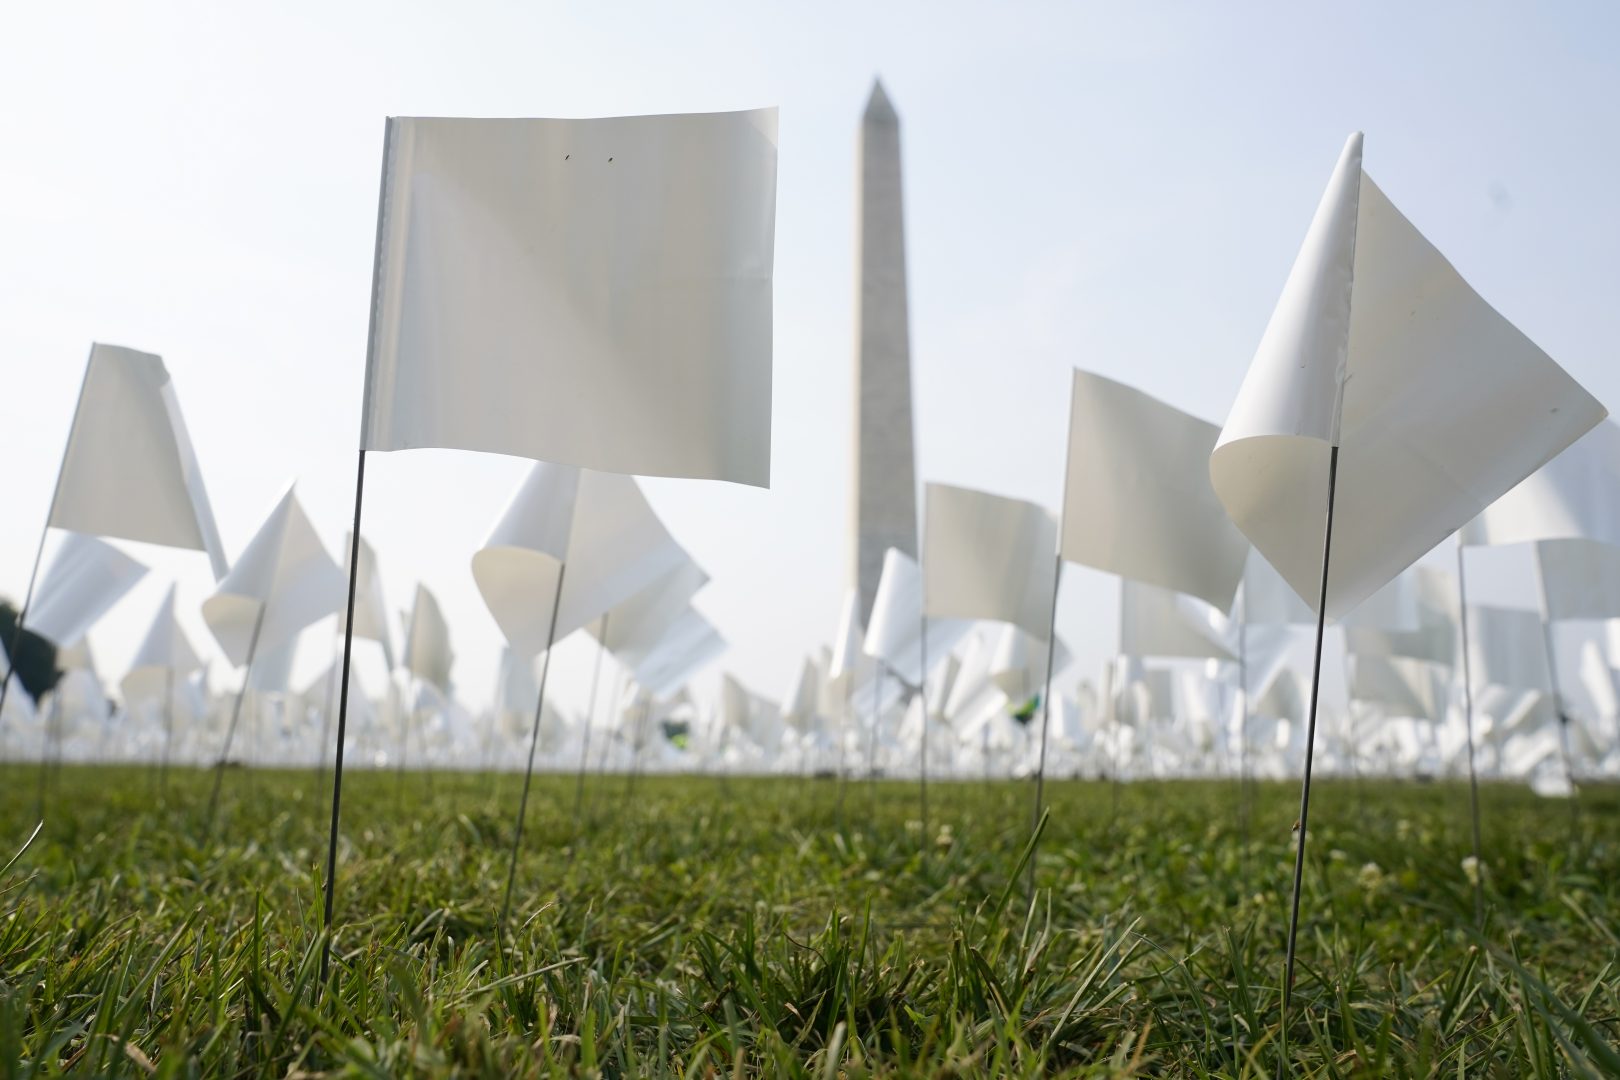 White flags stand near the Washington Monument on the National Mall in Washington, Tuesday, Sept. 14, 2021. The flags, which will number more than 630,000 when completed, are part of artist Suzanne Brennan Firstenberg's temporary art installation, 